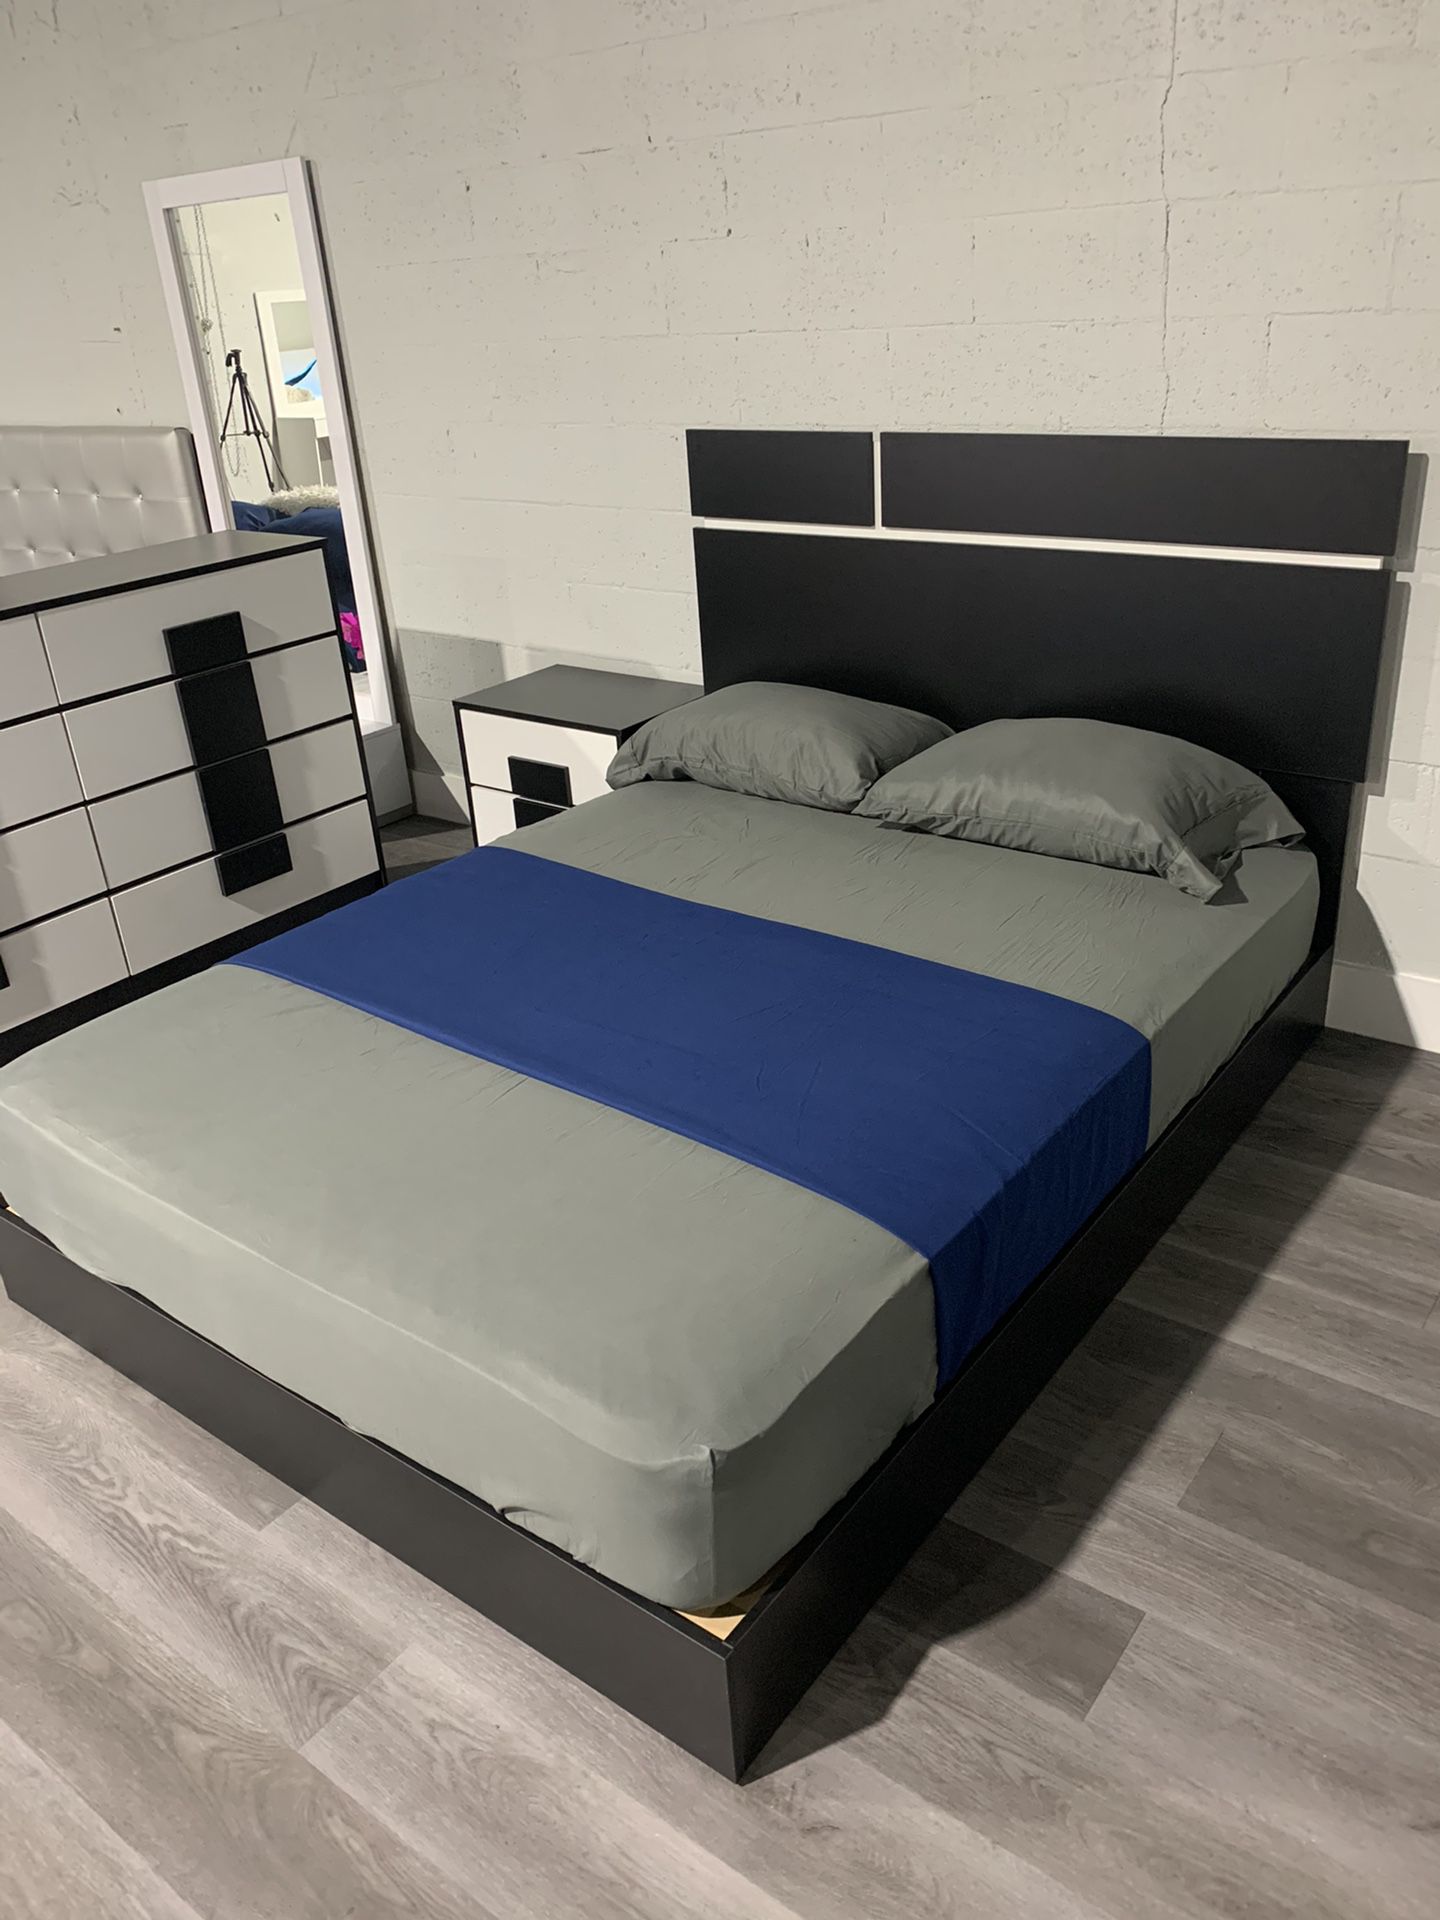 New black and white queen bed frame with the mattress FREE DELIVERY and installation